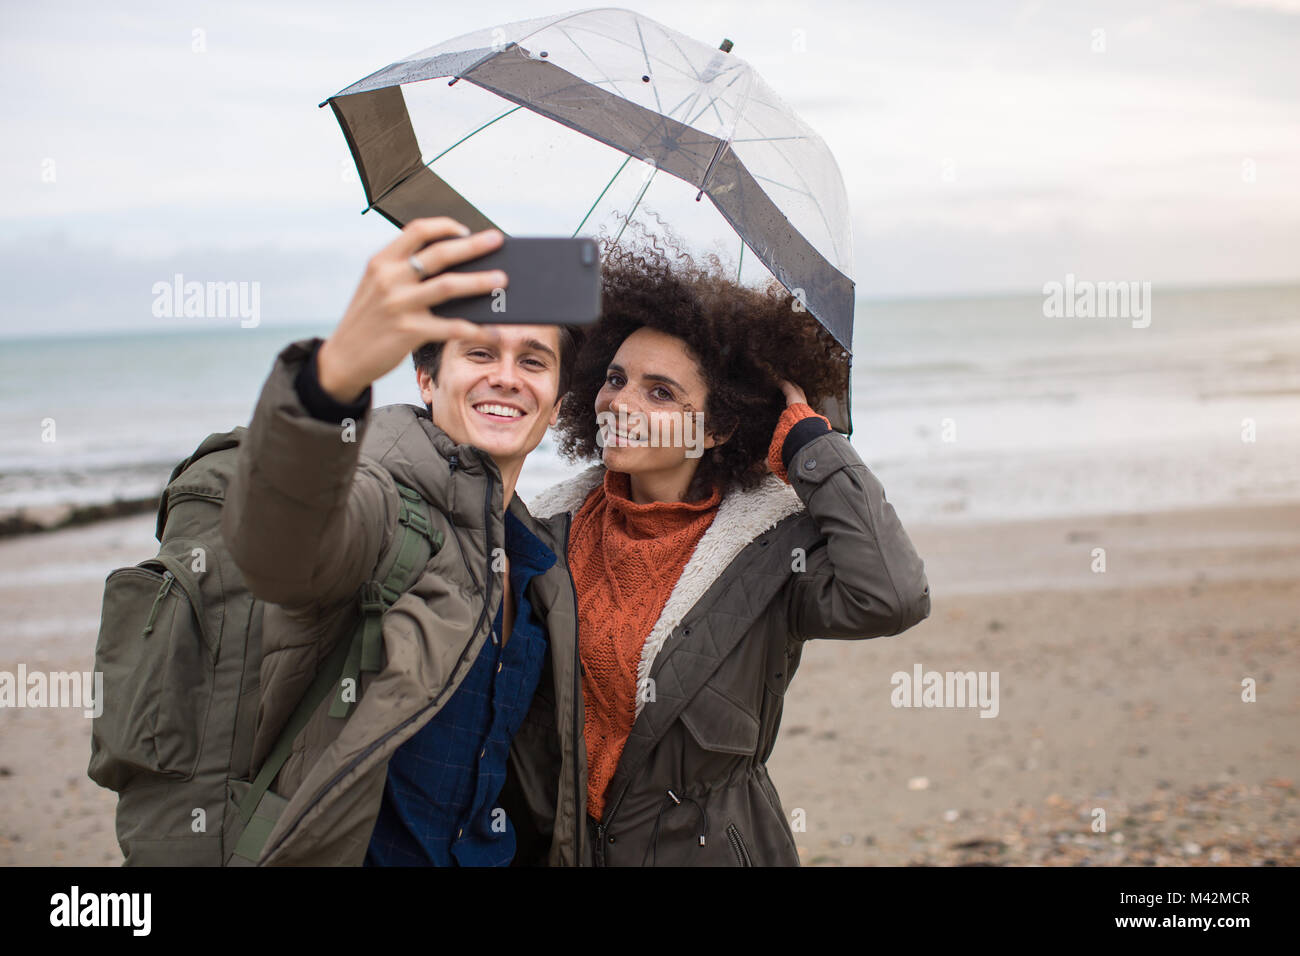 Young couple taking a selfie on a beach in bad weather Stock Photo